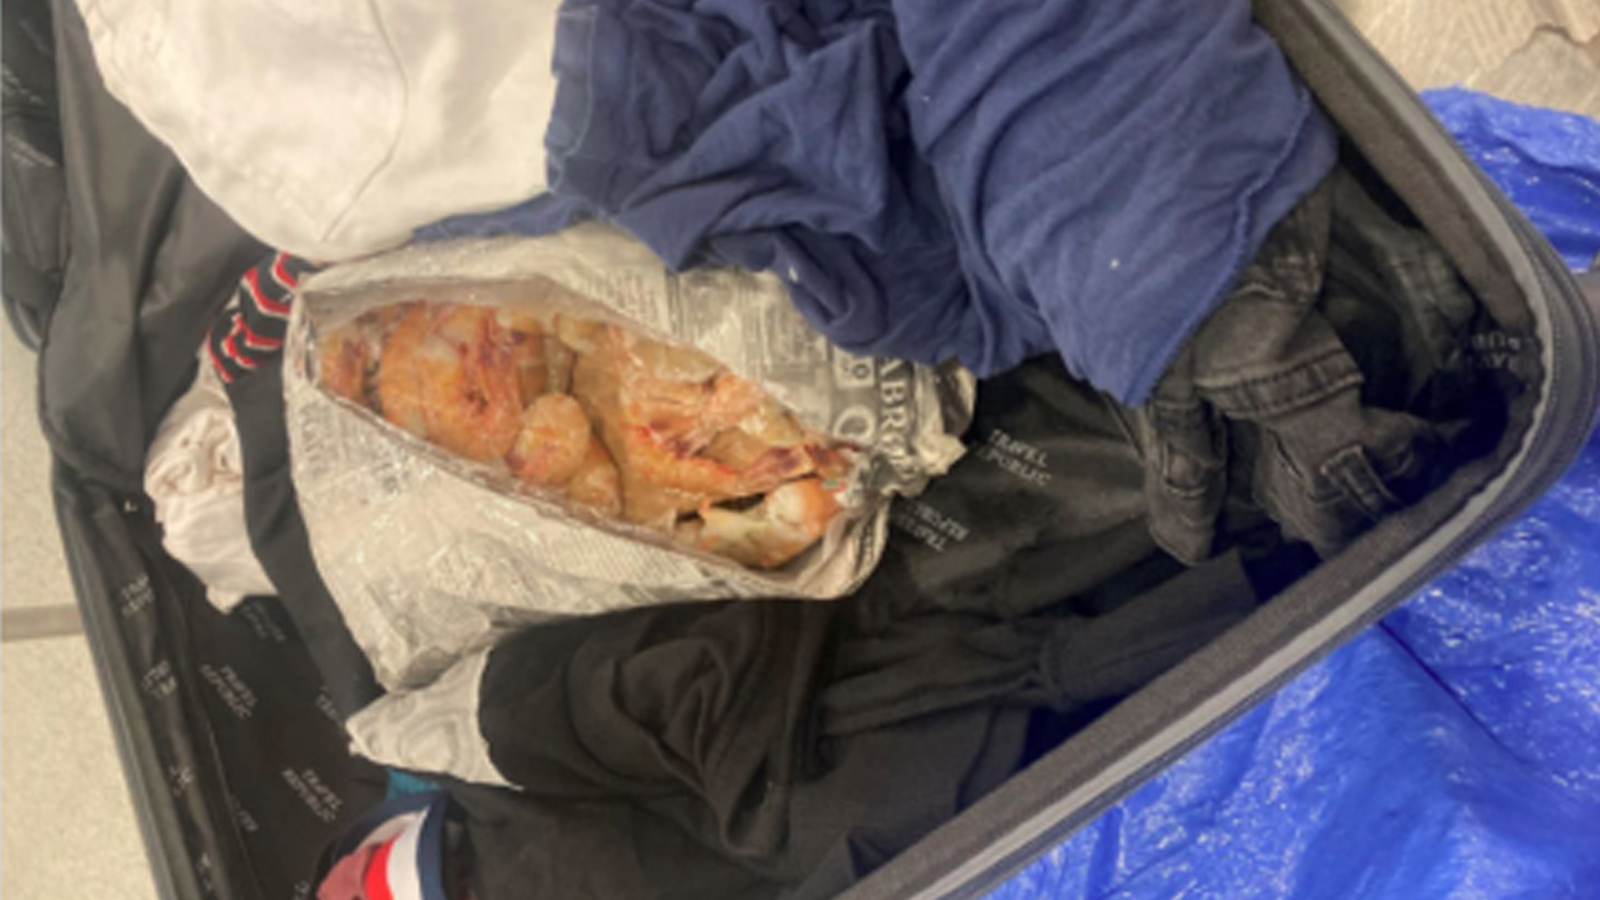 Arrest Made in Connection with Alleged Smuggling of Cocaine Inside Frozen Jumbo Shrimp Bags